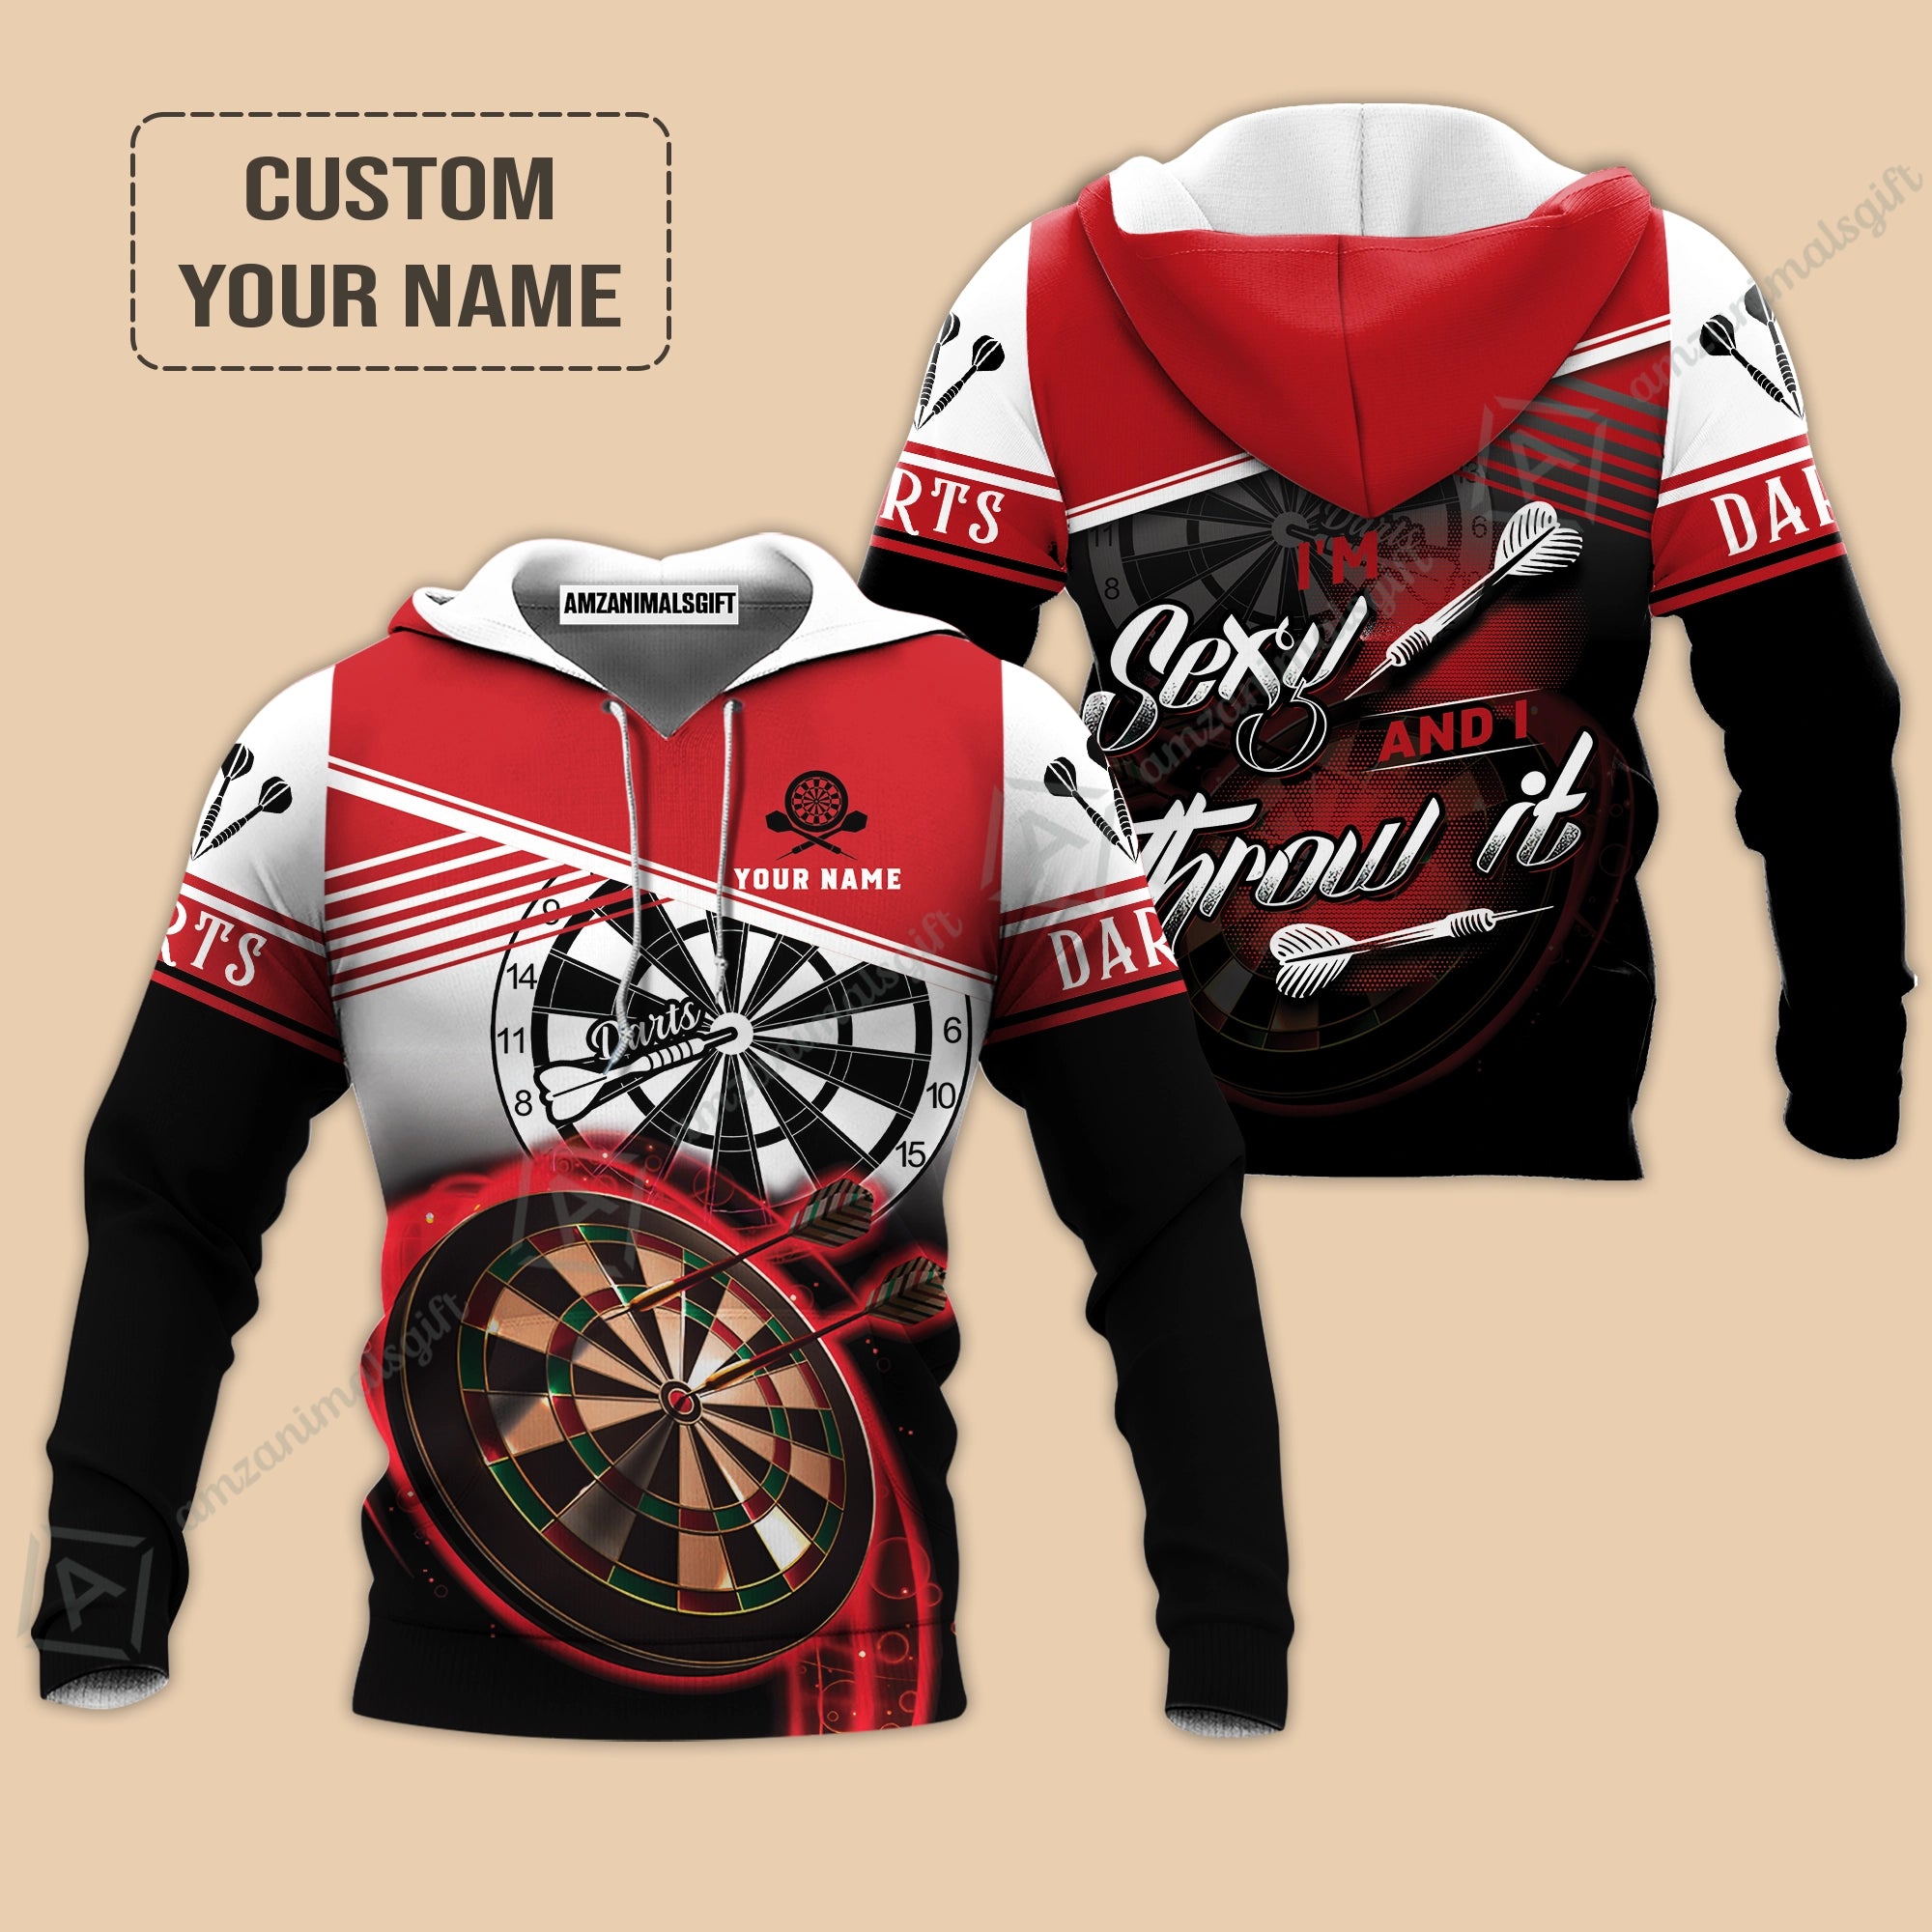 Personalized Darts Hoodie, Darts Red Color Custom Hoodie I'm Sexy And I Throw It, Outfits For Darts Players, Darts Team